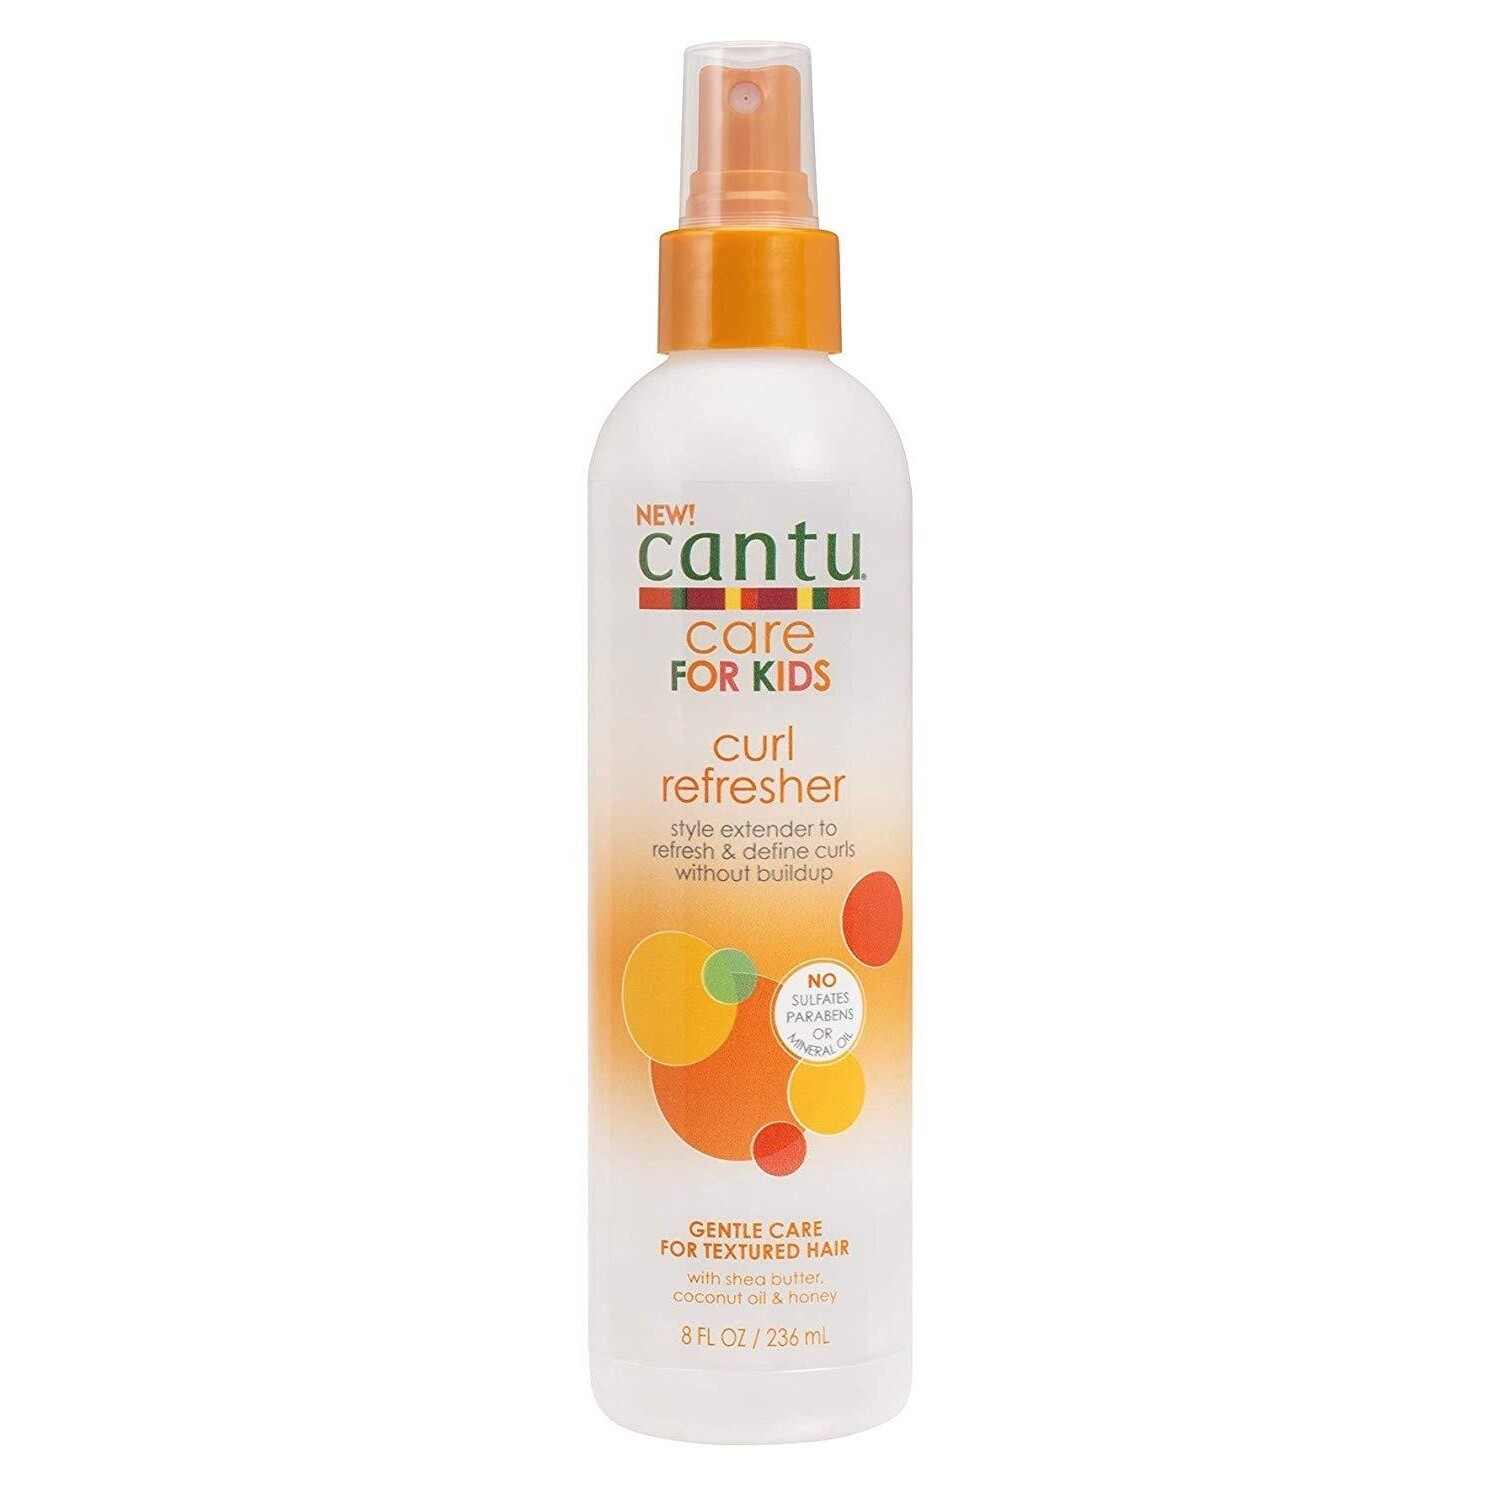 Cantu care for Kids curl refresher